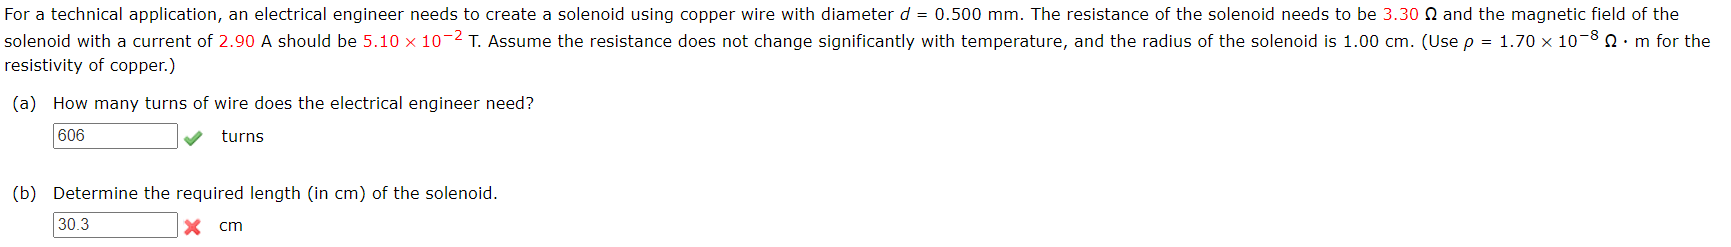 For a technical application, an electrical engineer needs to create a solenoid using copper wire with diameter d = 0.500 mm. The resistance of the solenoid needs to be 3.30 N and the magnetic field of the
solenoid with a current of 2.90 A should be 5.10 x 10-2 T. Assume the resistance does not change significantly with temperature, and the radius of the solenoid is 1.00 cm. (Use p = 1.70 x 10–8 Q:m for the
resistivity of copper.)
(a) How many turns of wire does the electrical engineer need?
606
turns
(b) Determine the required length (in cm) of the solenoid.
30.3
cm
